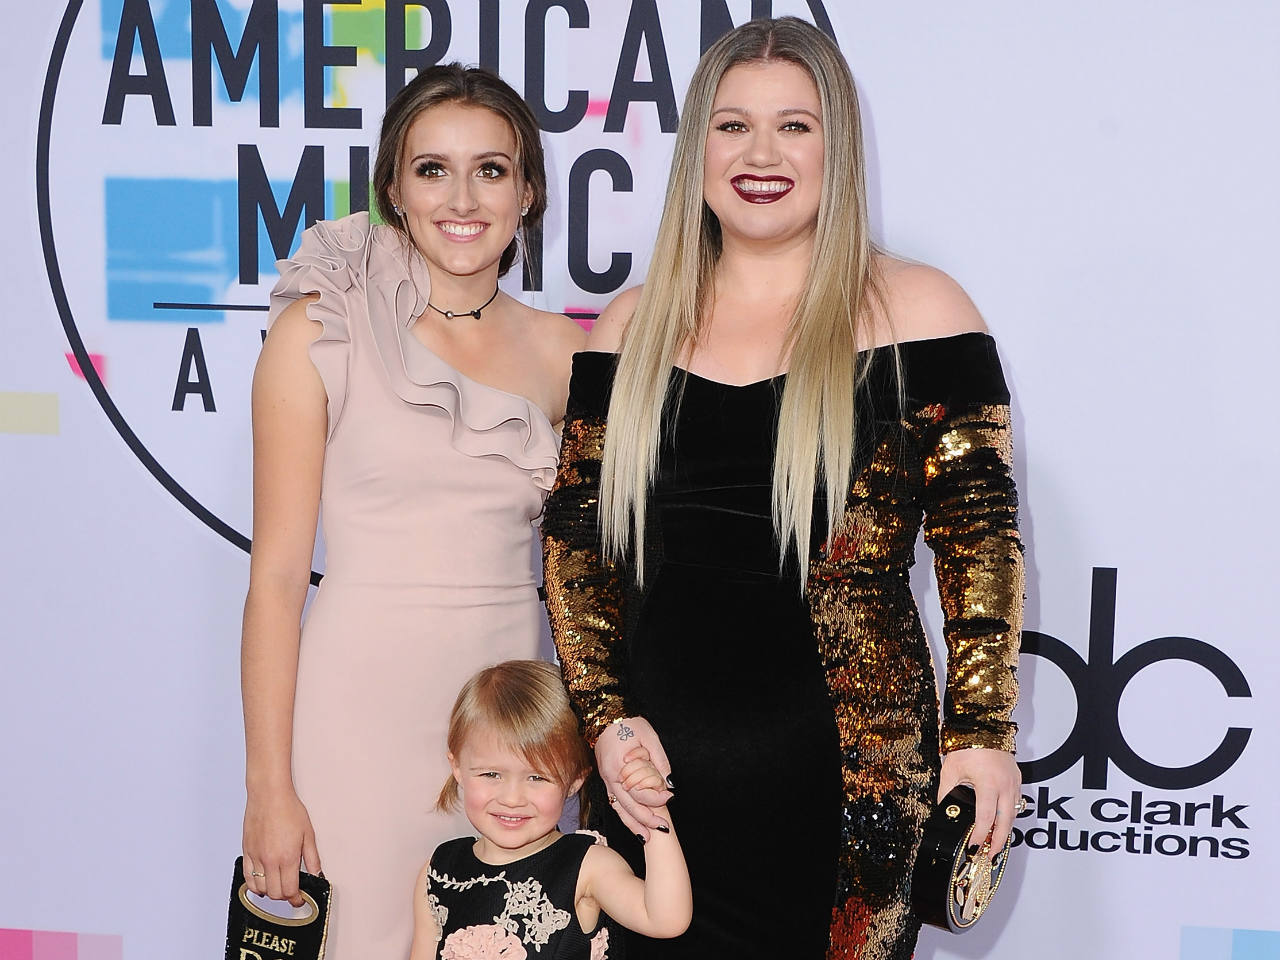 Kelly clarkson and her two daughters posing on a red carpet